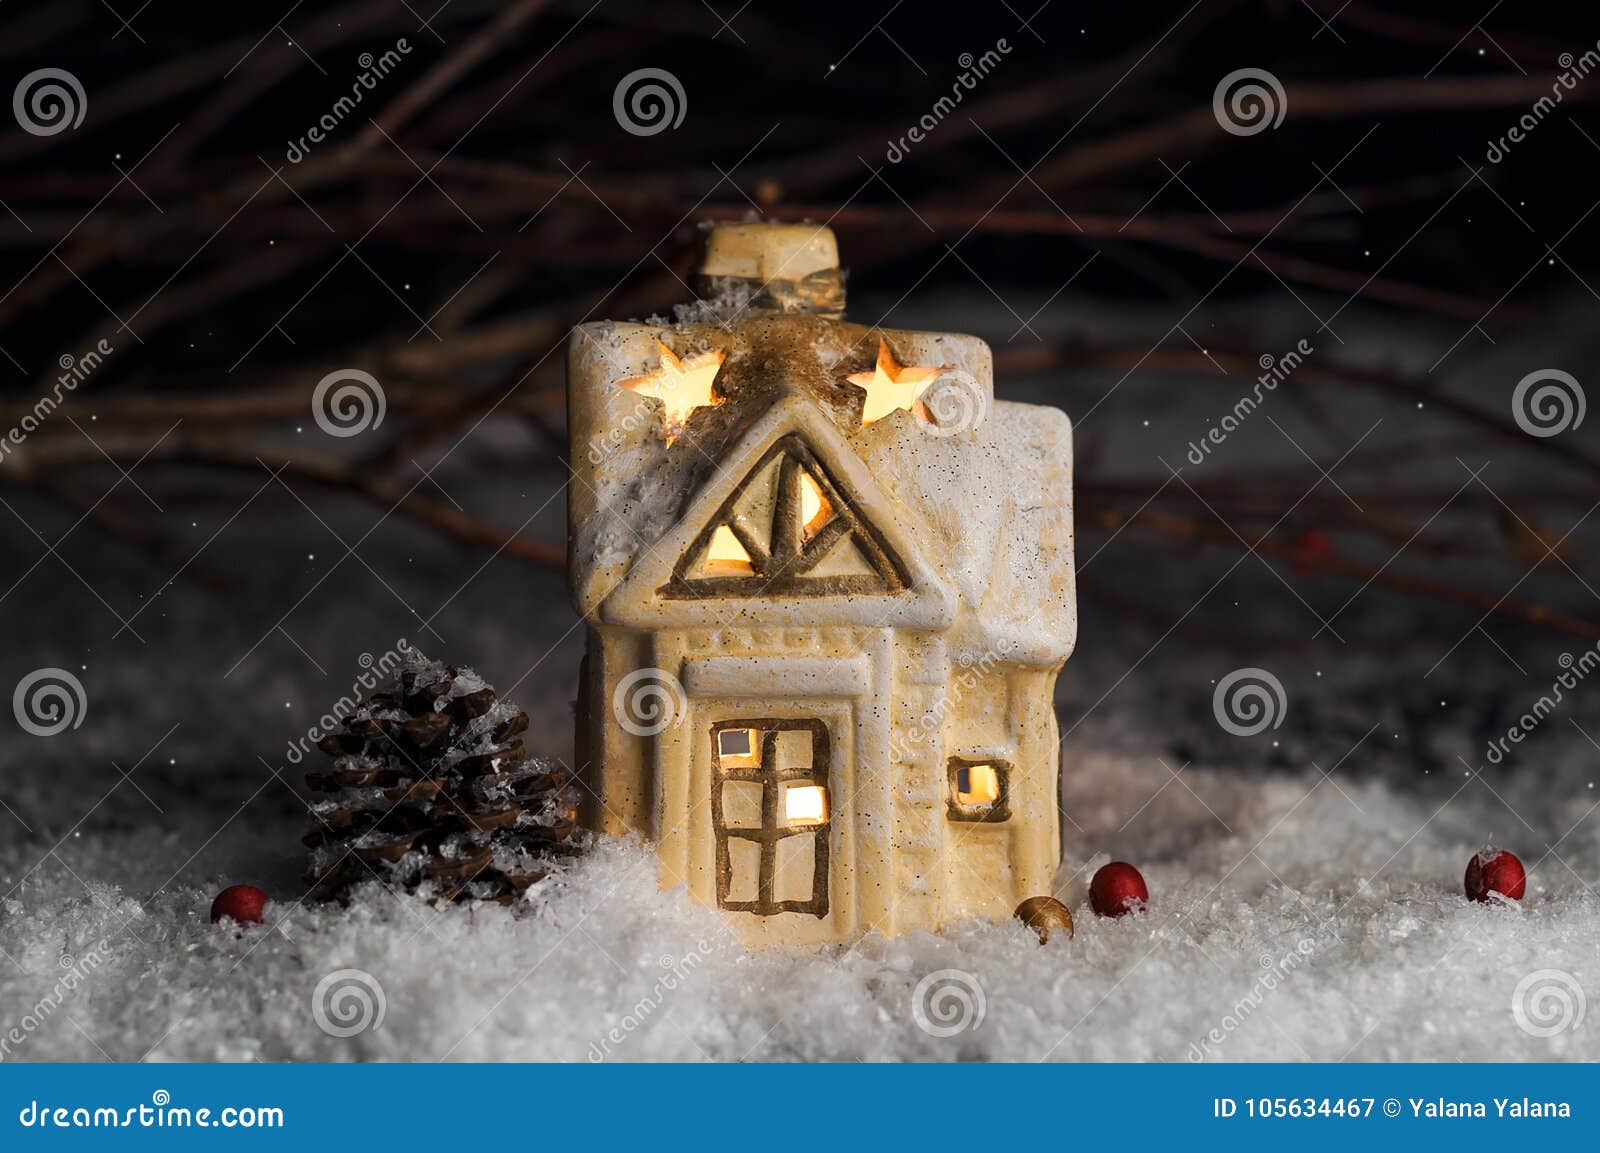 Decorative Christmas Decorations, A House In The Snow Stock Image ...